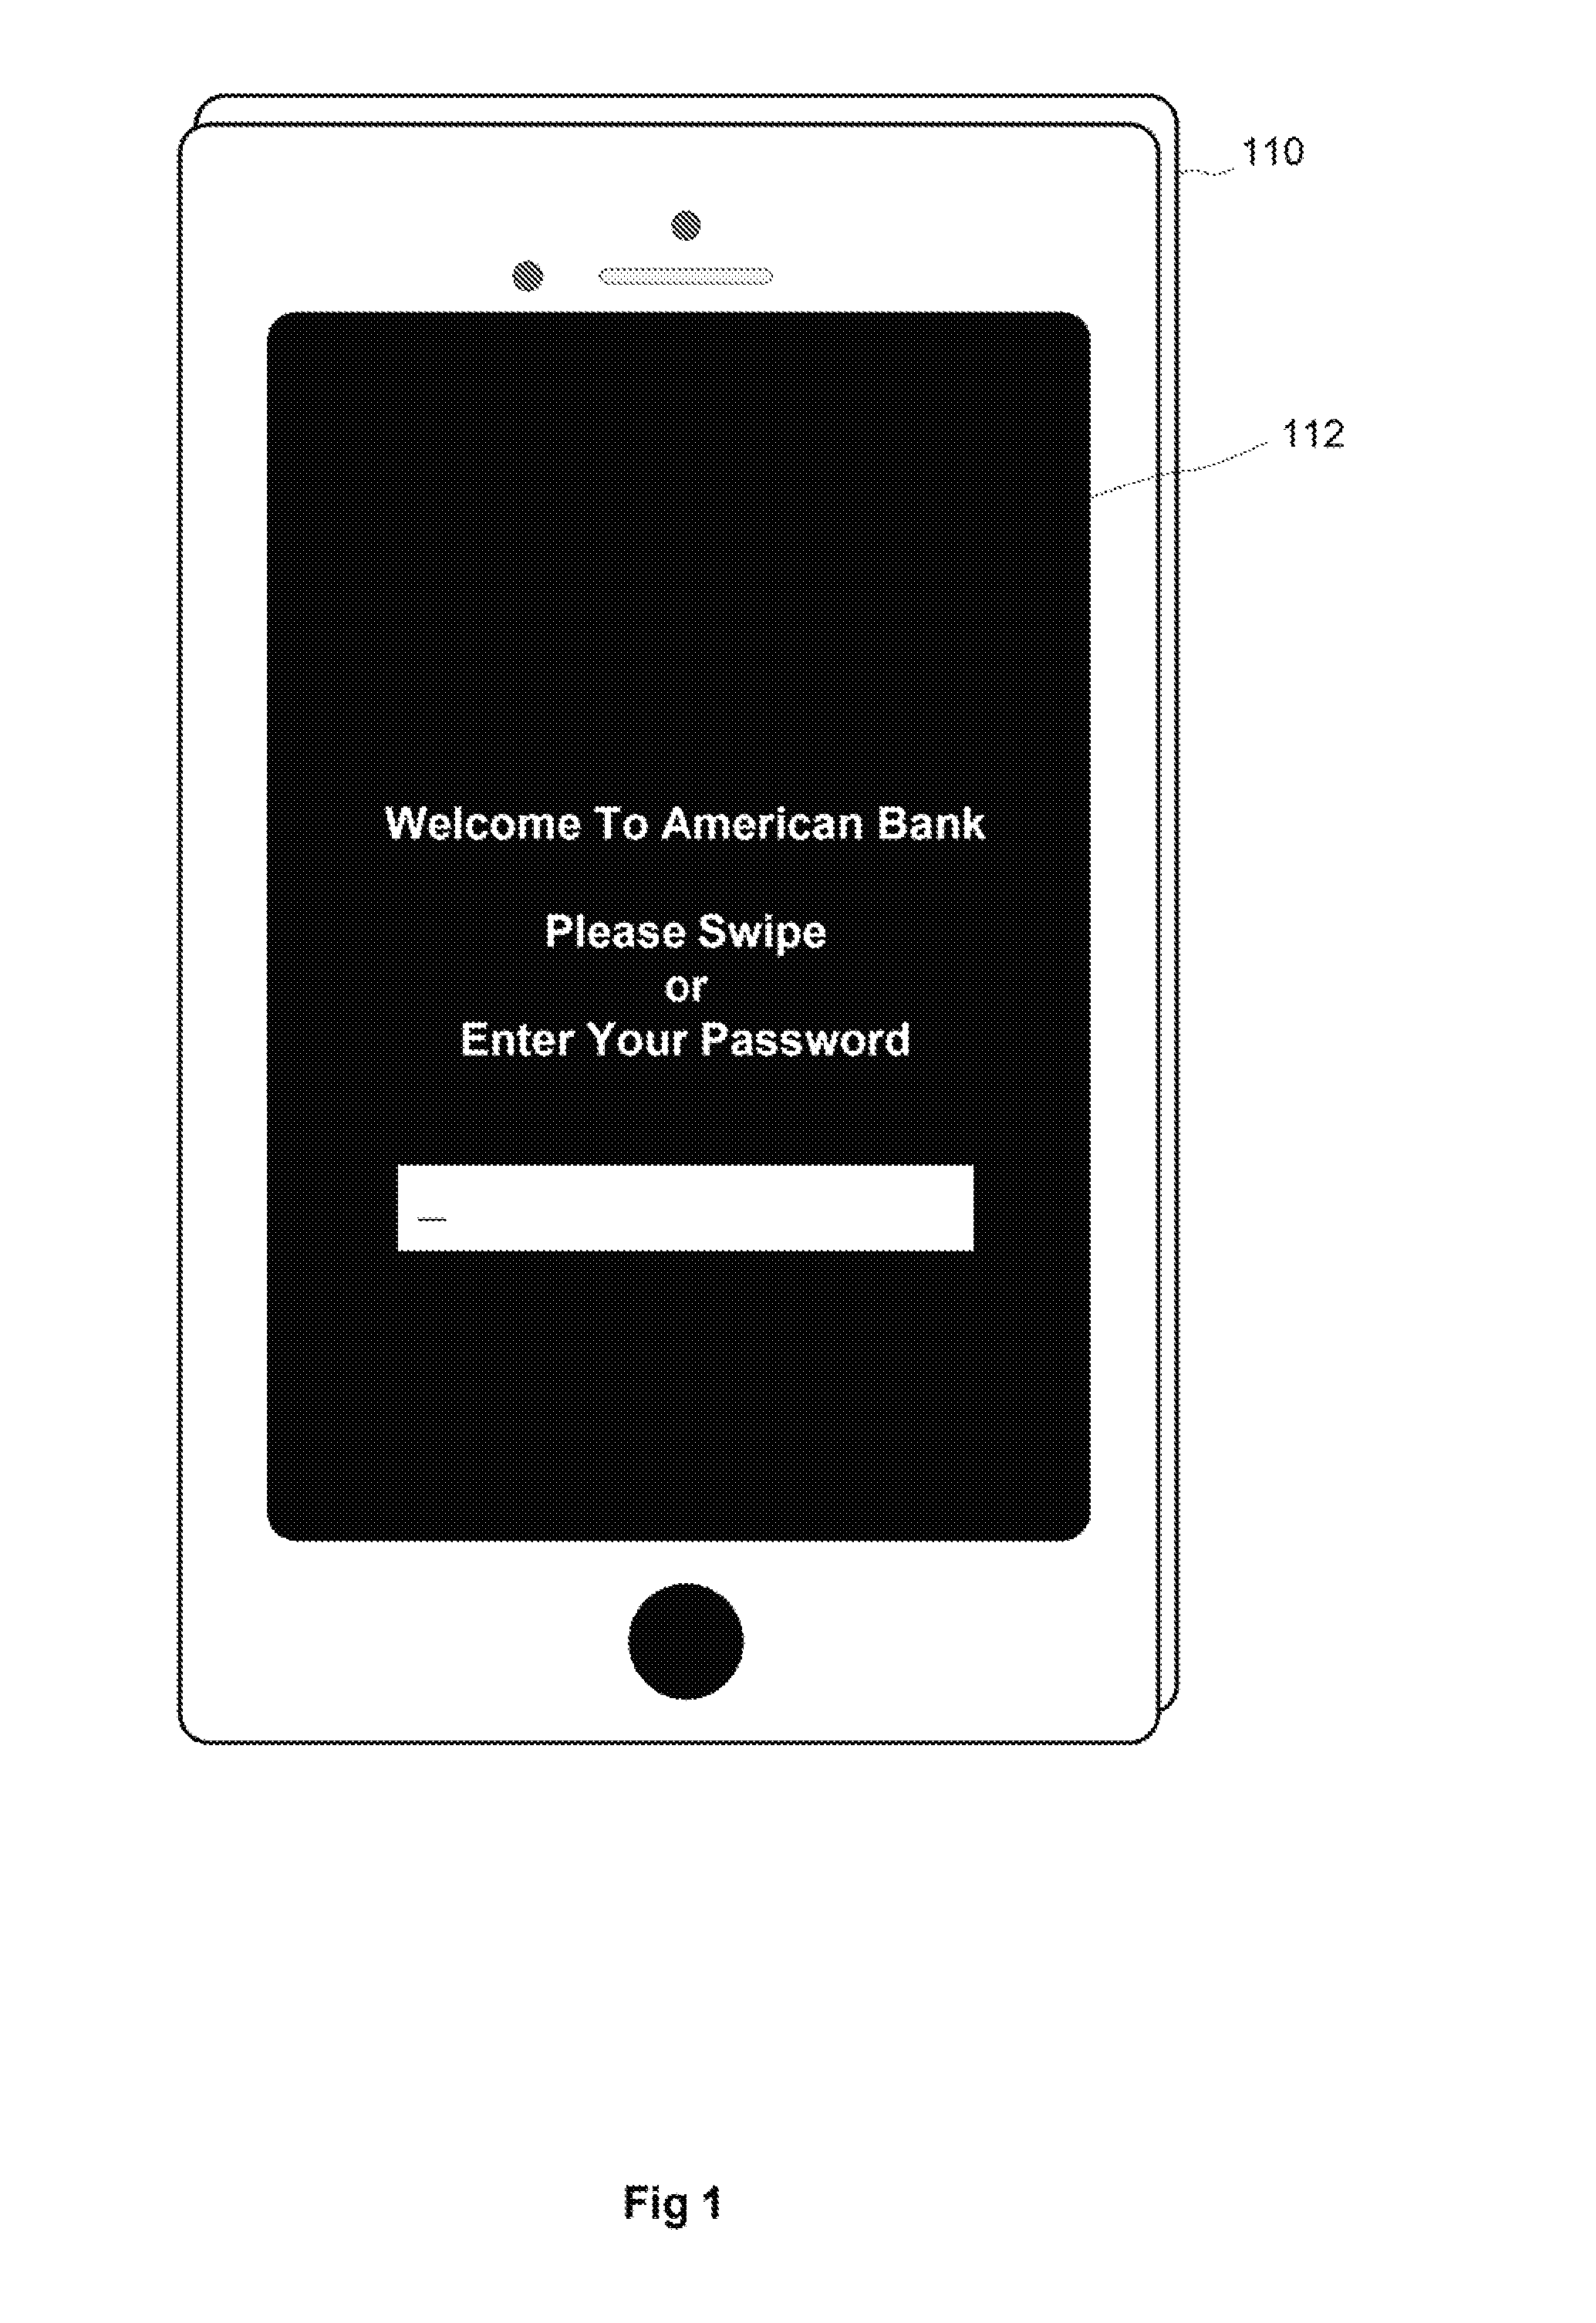 System for transparent authentication across installed applications